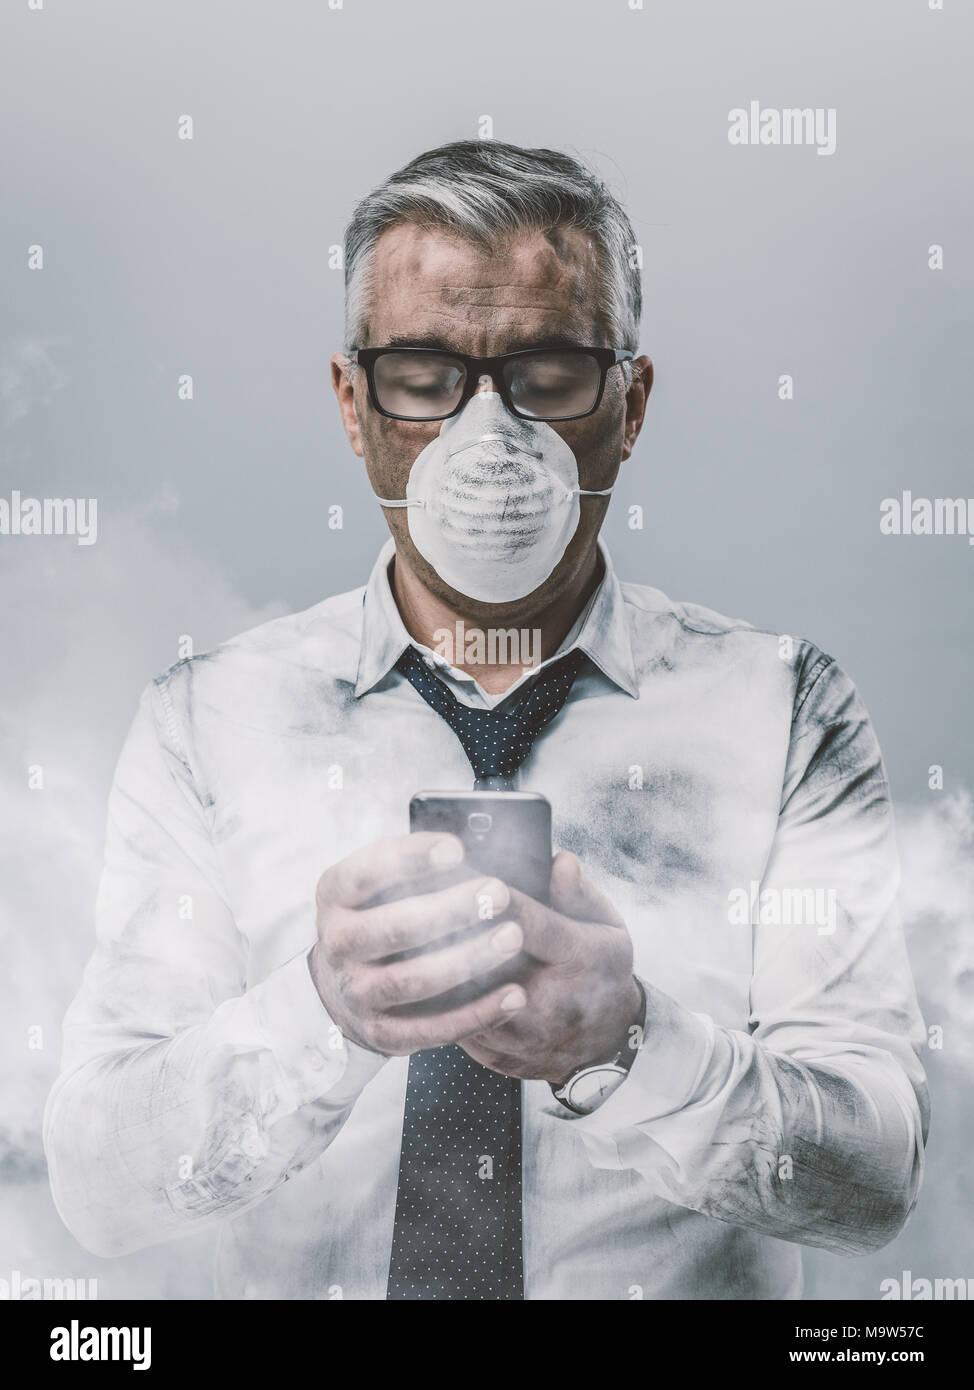 Corporate business executive with protective mask and smog, he is using a smartphone Stock Photo